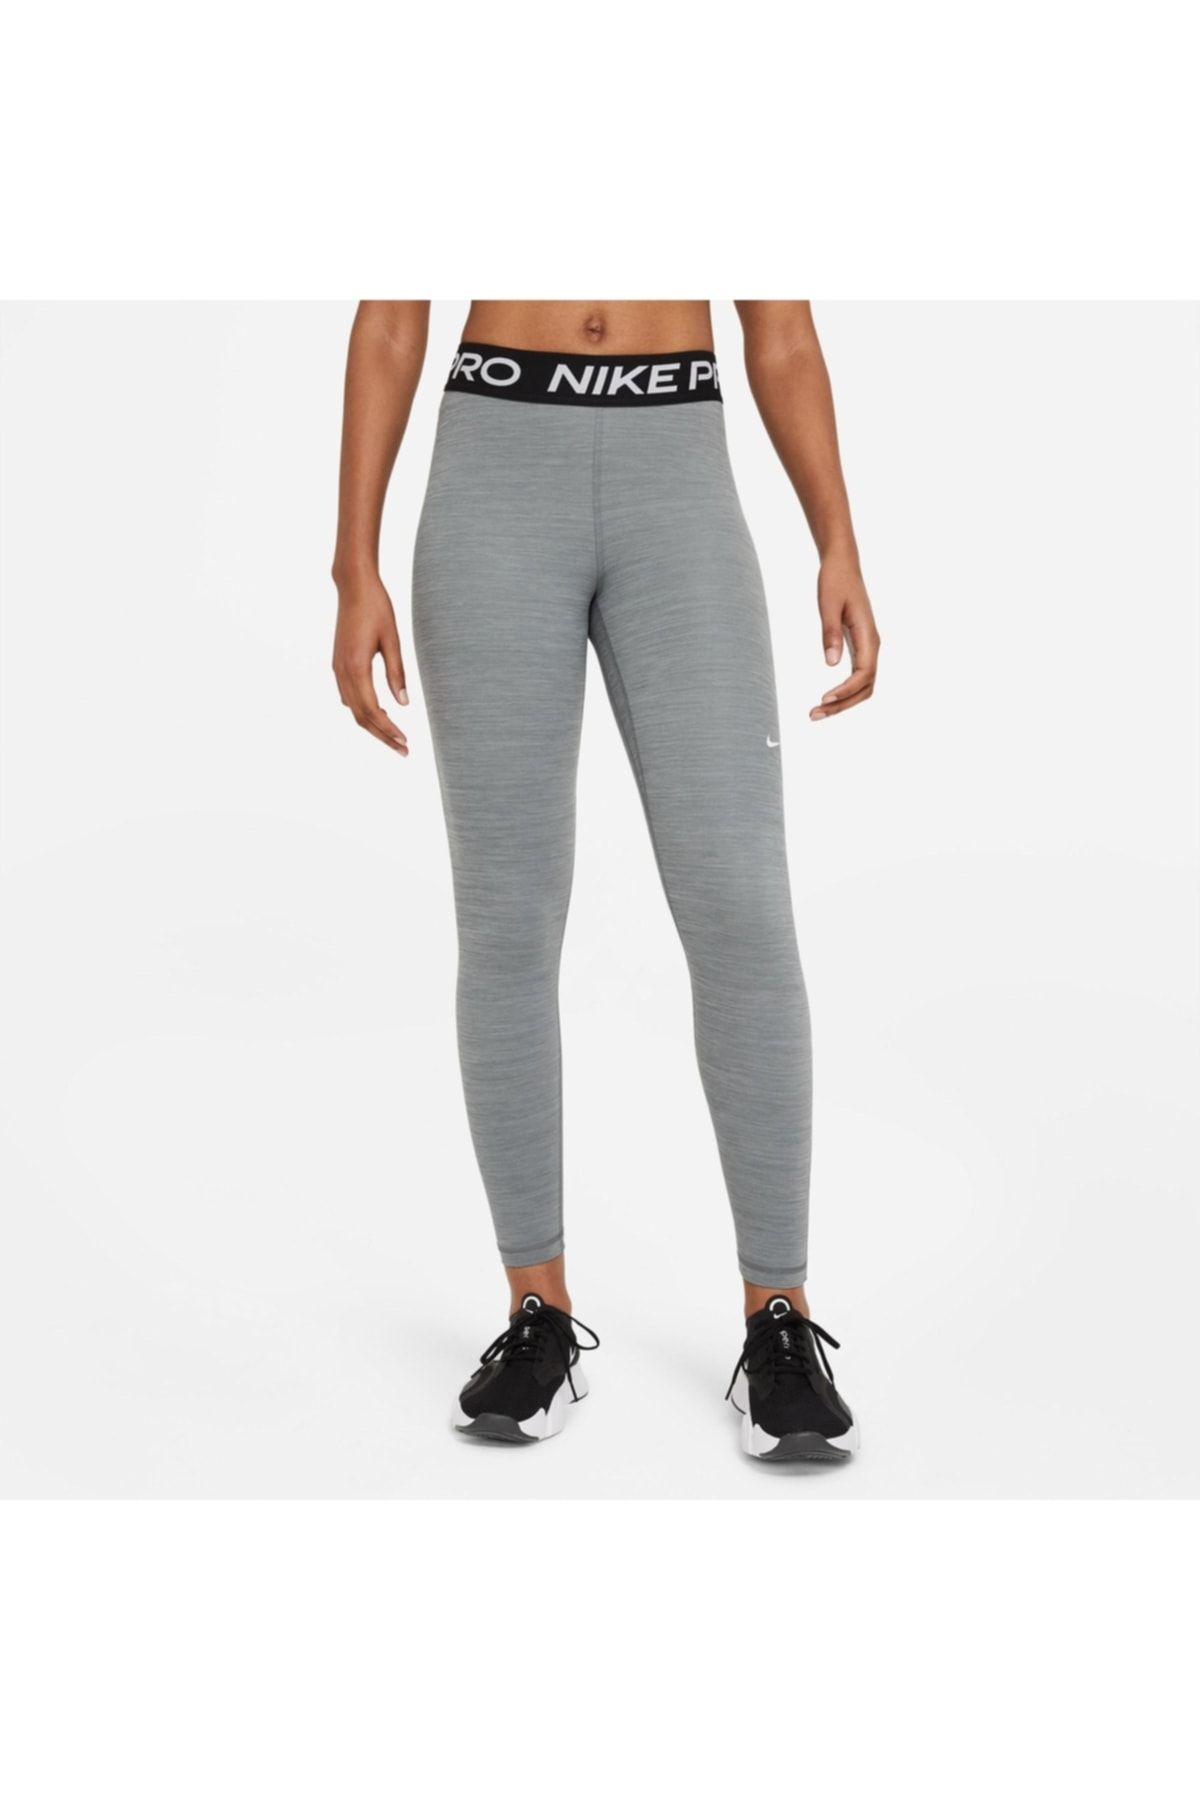 Nike Pro W Np Dri-fit Grx Tgt Nfs Women's Red Casual Style Tights  Dr7741-693 - Trendyol